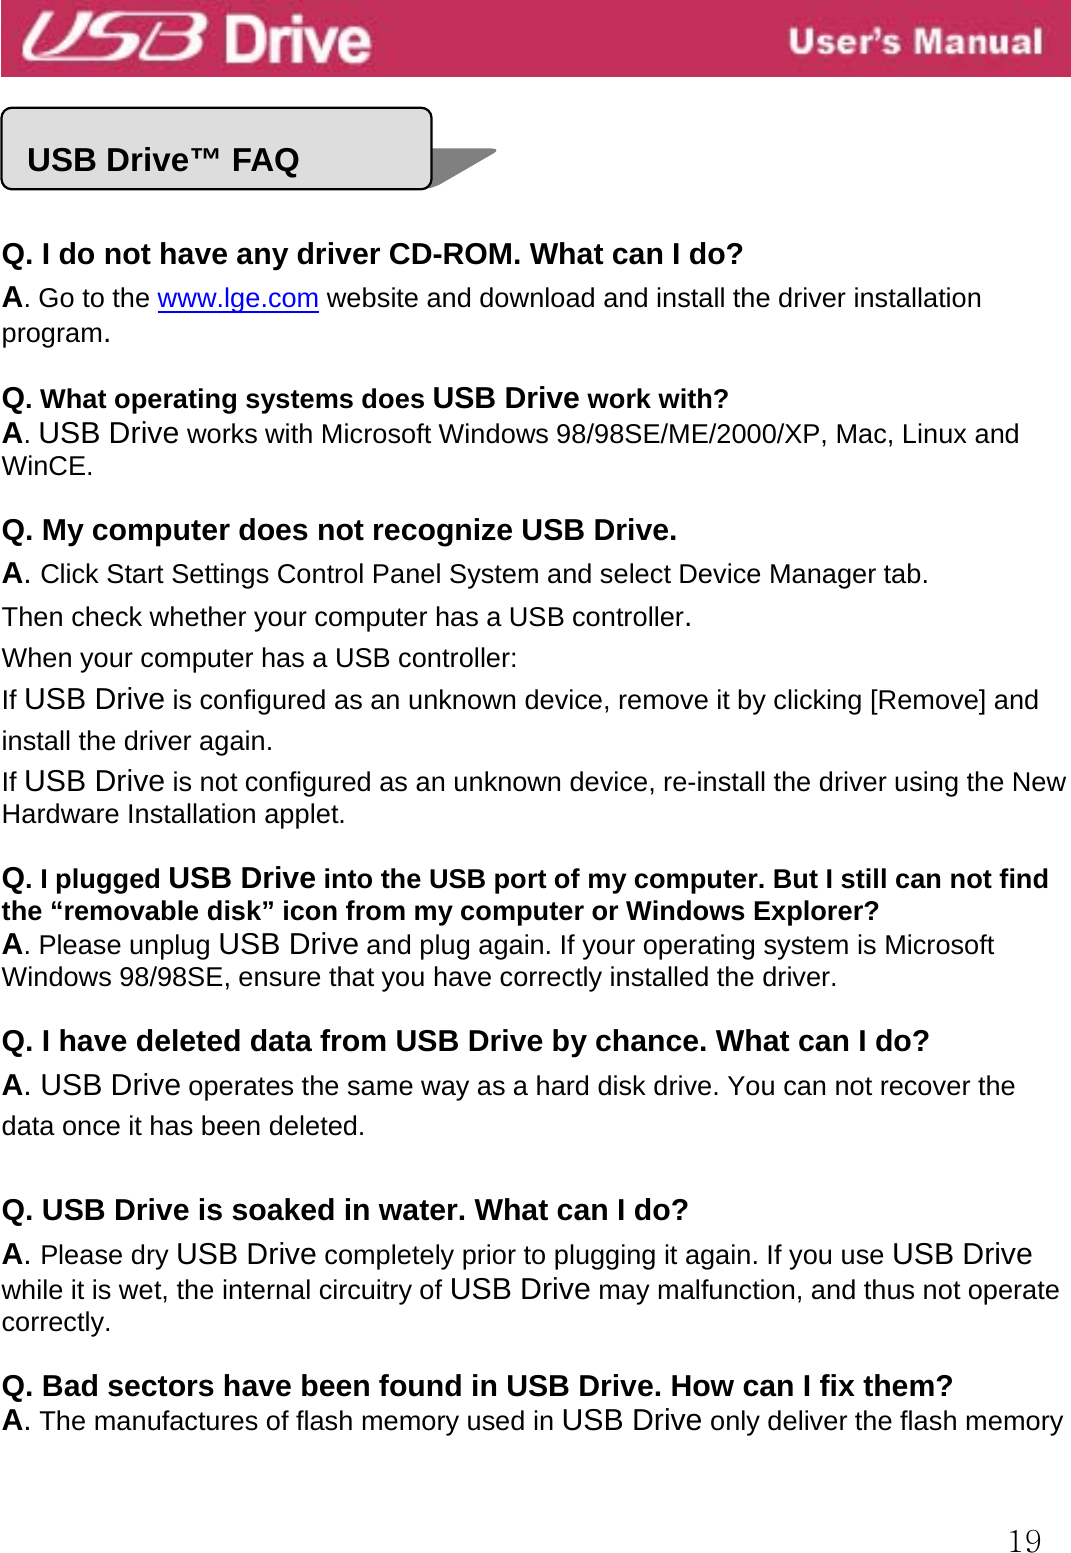  19    ell   Q. I do not have any driver CD-ROM. What can I do? A. Go to the www.lge.com website and download and install the driver installation program.  Q. What operating systems does USB Drive work with? A. USB Drive works with Microsoft Windows 98/98SE/ME/2000/XP, Mac, Linux and WinCE.  Q. My computer does not recognize USB Drive. A. Click Start Settings Control Panel System and select Device Manager tab. Then check whether your computer has a USB controller. When your computer has a USB controller: If USB Drive is configured as an unknown device, remove it by clicking [Remove] and install the driver again. If USB Drive is not configured as an unknown device, re-install the driver using the New Hardware Installation applet.  Q. I plugged USB Drive into the USB port of my computer. But I still can not find the “removable disk” icon from my computer or Windows Explorer? A. Please unplug USB Drive and plug again. If your operating system is Microsoft Windows 98/98SE, ensure that you have correctly installed the driver.  Q. I have deleted data from USB Drive by chance. What can I do? A. USB Drive operates the same way as a hard disk drive. You can not recover the data once it has been deleted.  Q. USB Drive is soaked in water. What can I do? A. Please dry USB Drive completely prior to plugging it again. If you use USB Drive while it is wet, the internal circuitry of USB Drive may malfunction, and thus not operate correctly.  Q. Bad sectors have been found in USB Drive. How can I fix them? A. The manufactures of flash memory used in USB Drive only deliver the flash memory   USB Drive™ FAQ 